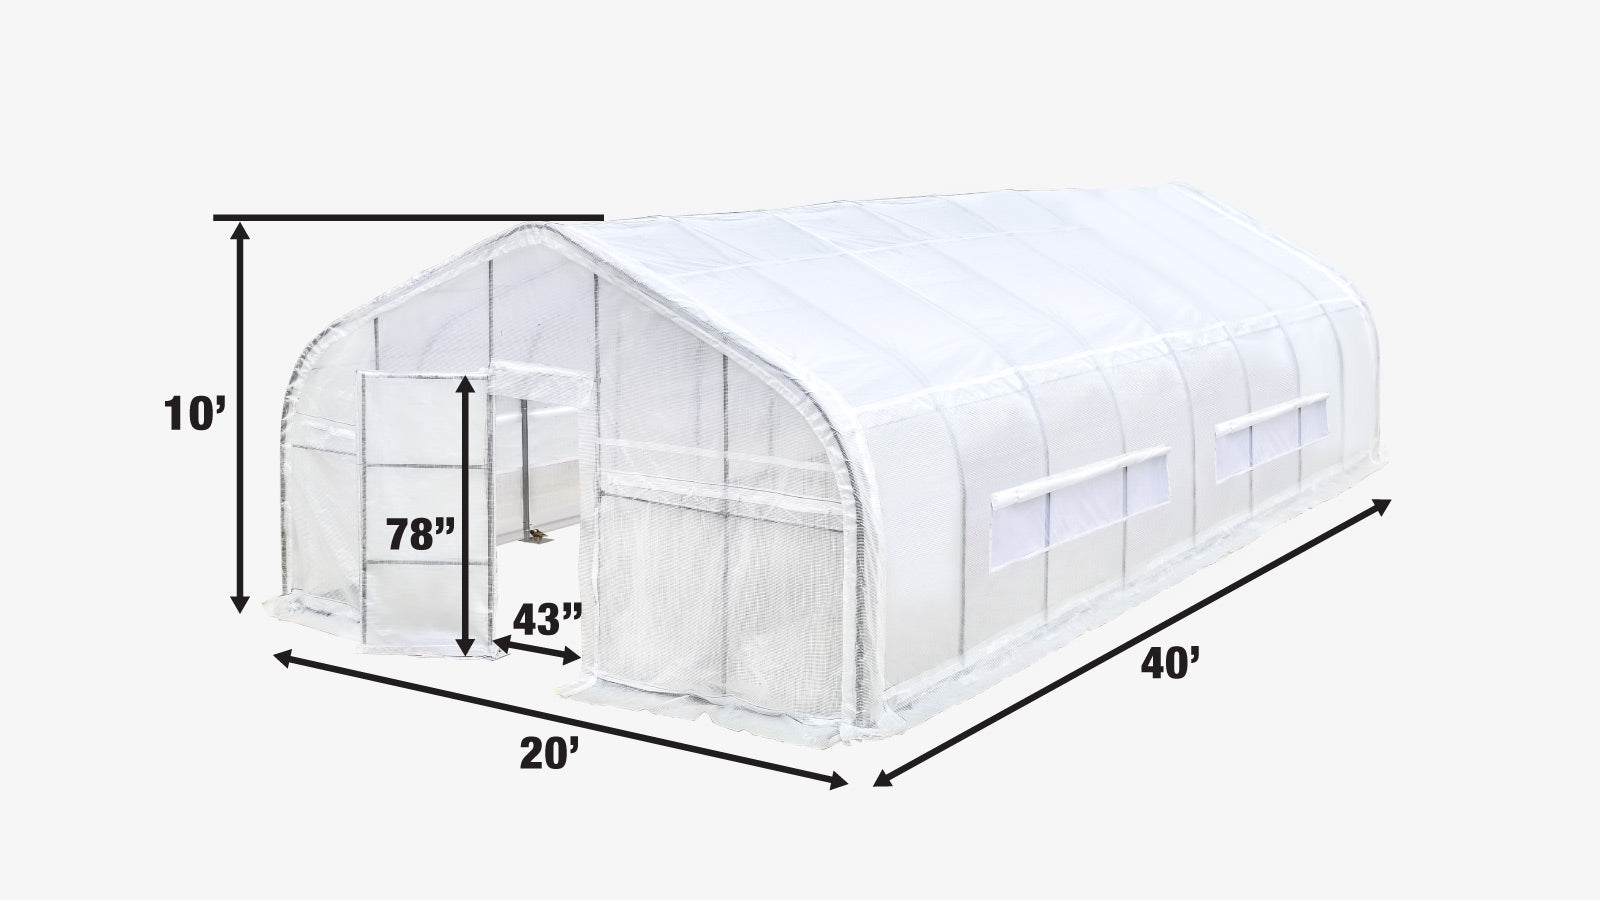 TMG Industrial 20’ x 40’ Tunnel Greenhouse Grow Tent w/12 Mil Ripstop Leno Mesh Cover, Cold Frame, Roll-up Windows, Peak Ceiling Roof, TMG-GH2040-specifications-image